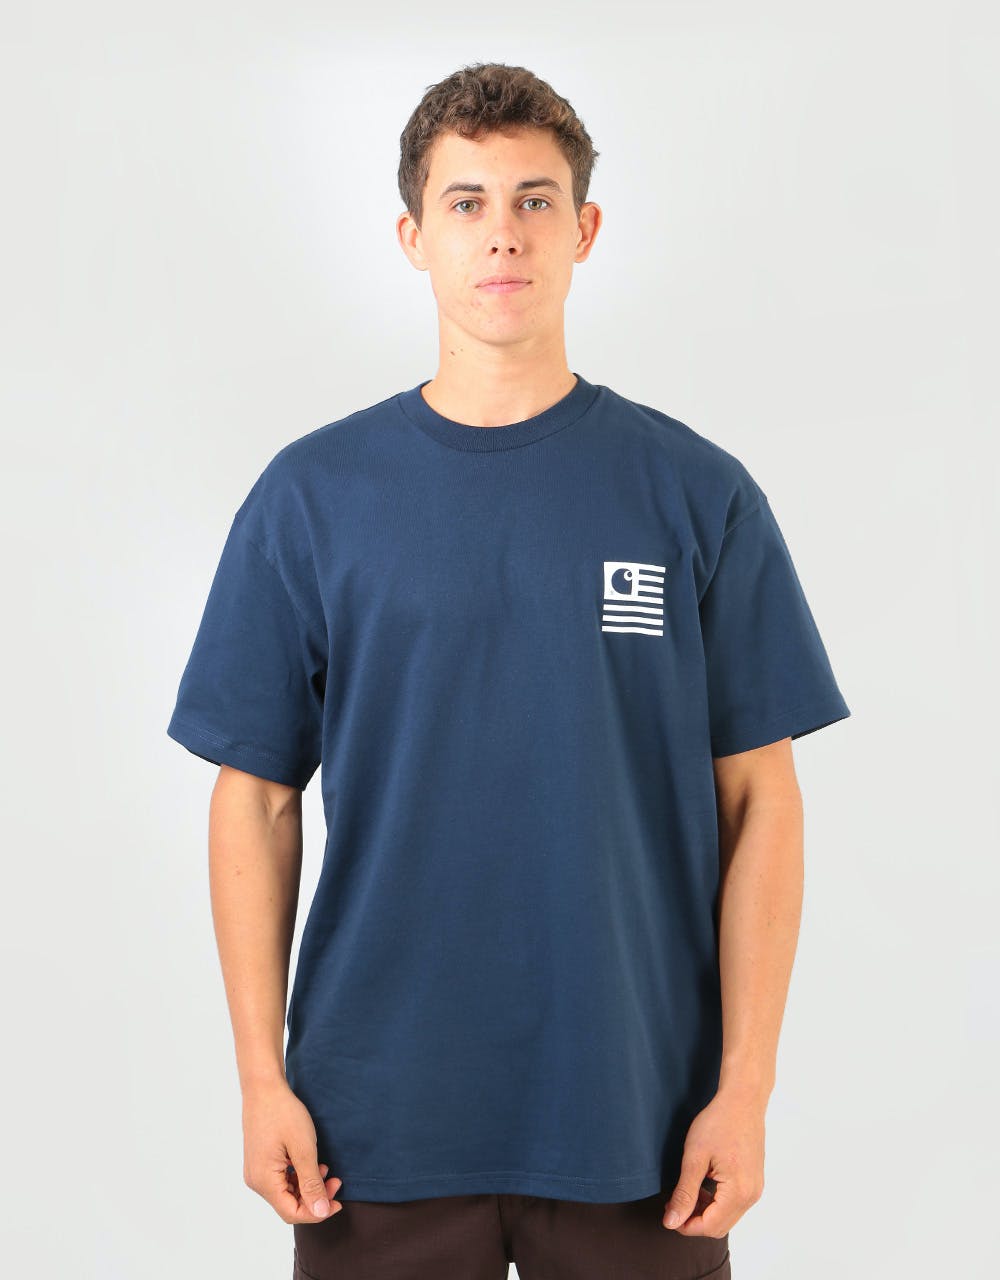 Carhartt WIP S/S Incognito T-Shirt - Blue